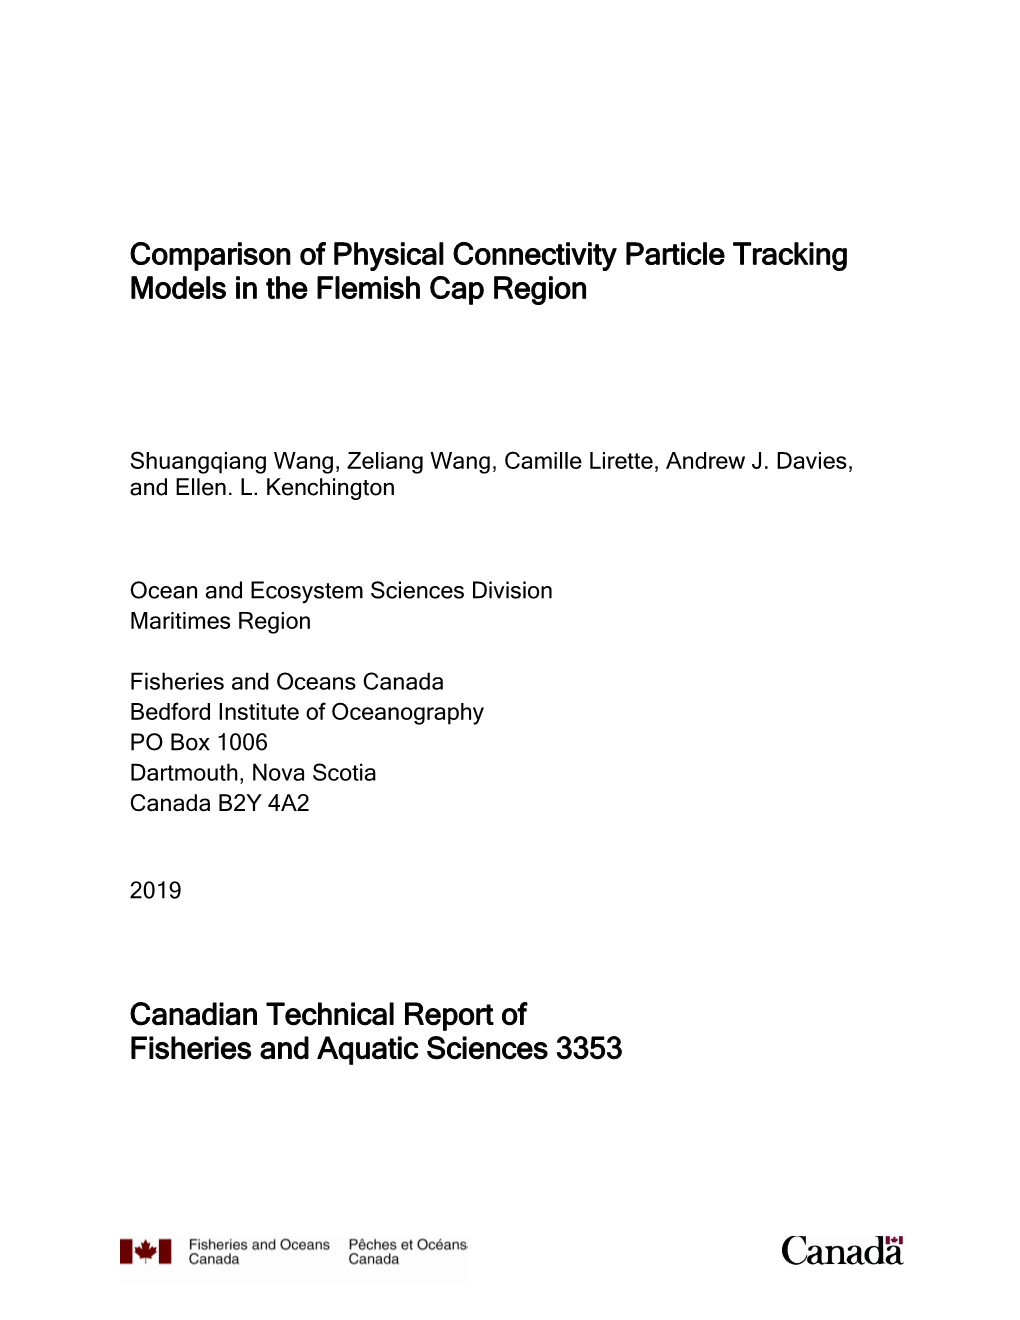 Comparison of Physical Connectivity Particle Tracking Models in the Flemish Cap Region